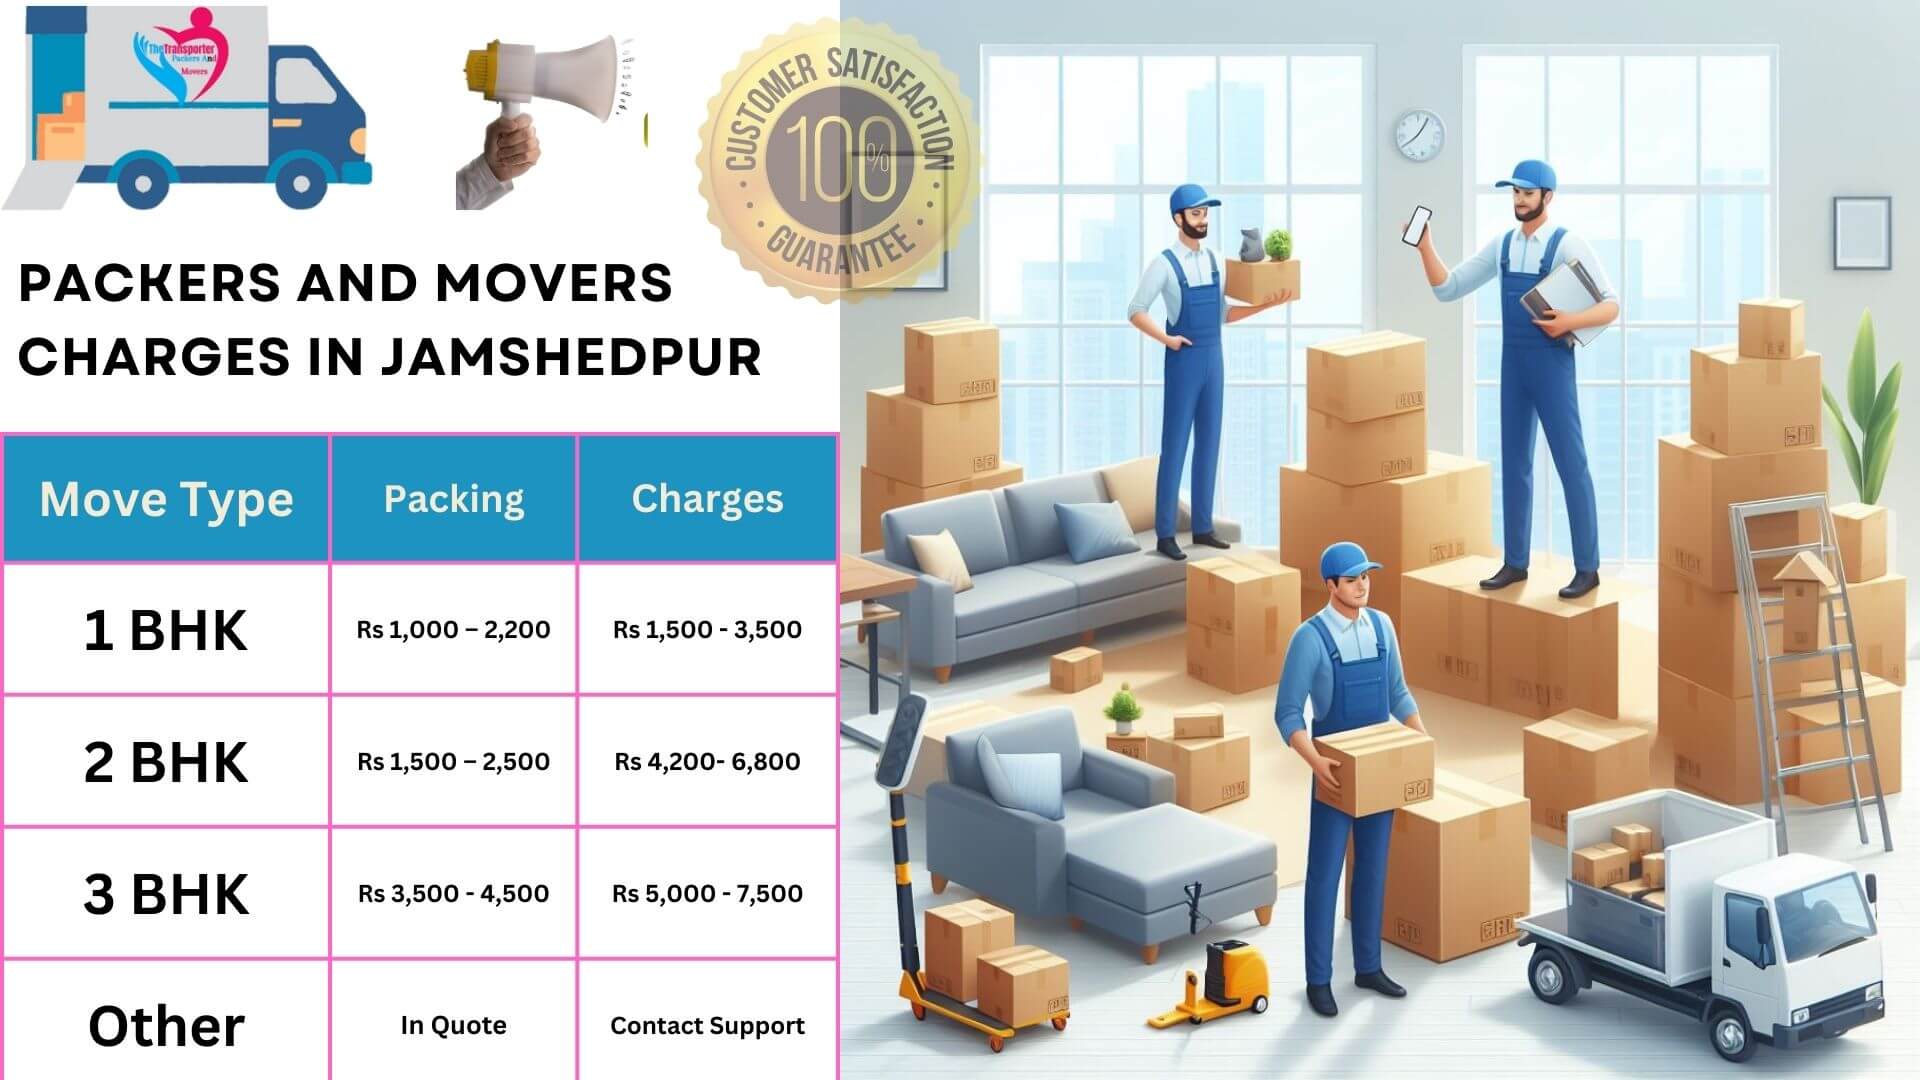 TheTransporter Packers and movers Charges list in Jamshedpur 